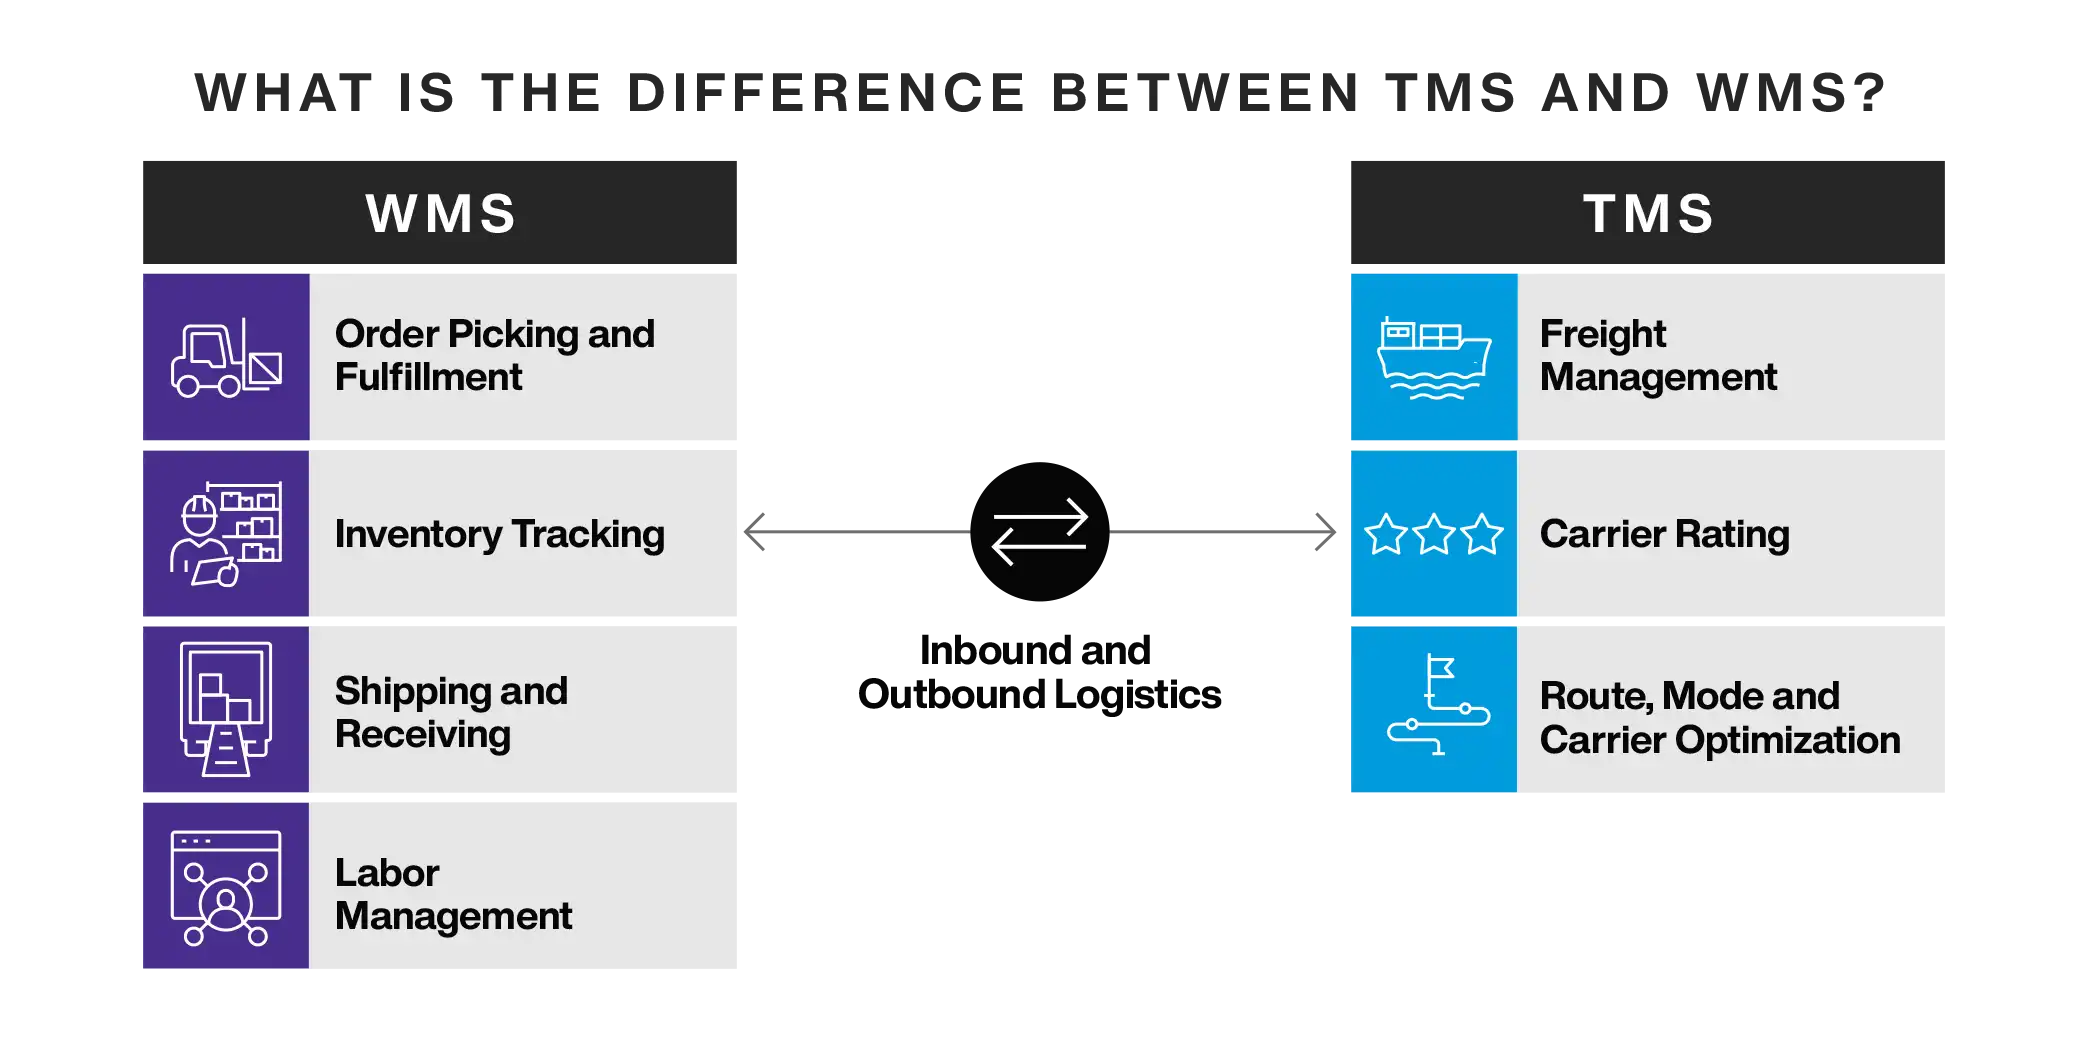 Difference Between TMS and WMS